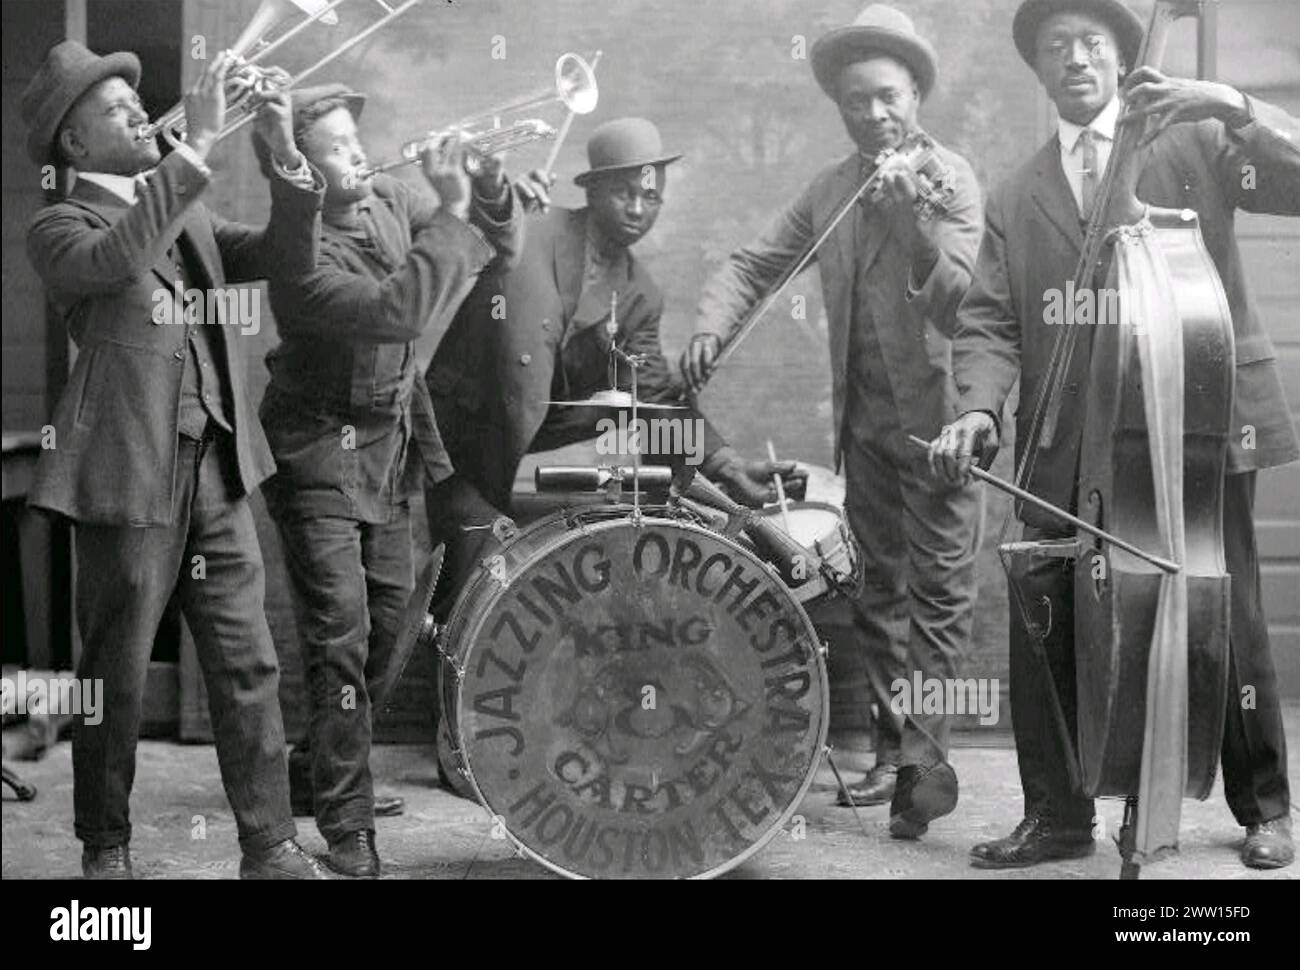 KING AND CARTER JAZZING ORCHESTRA in Houston, Texas, January 1921. Photo: Robert Runyon Stock Photo